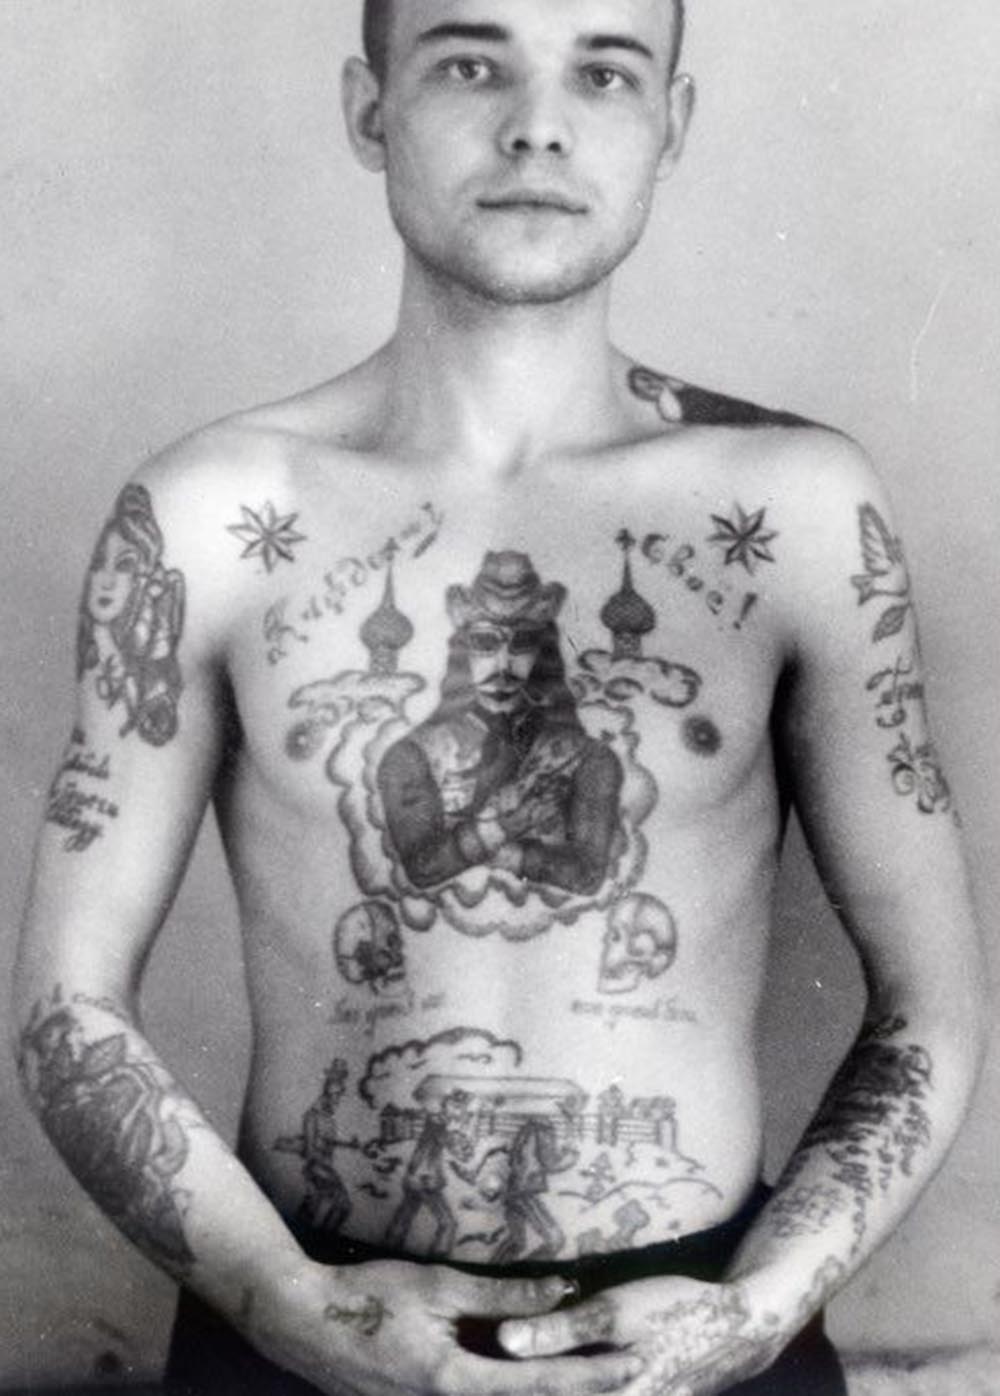 Text on the right arm reads 'Save love, keep freedom.' Text on the left arm reads 'Sinner.' Text across the chest reads 'To each his own.' Text underneath the skulls reads 'God against everyone, everyone against God.' Text on the wrist in German reads 'Mein Gott' (My God). A cowboy with a gun shows this thief is prepared to take risks and is ready to exploit any opportunity. A dove carrying a twig (left shoulder) is a symbol of good tidings and deliverance from suffering.